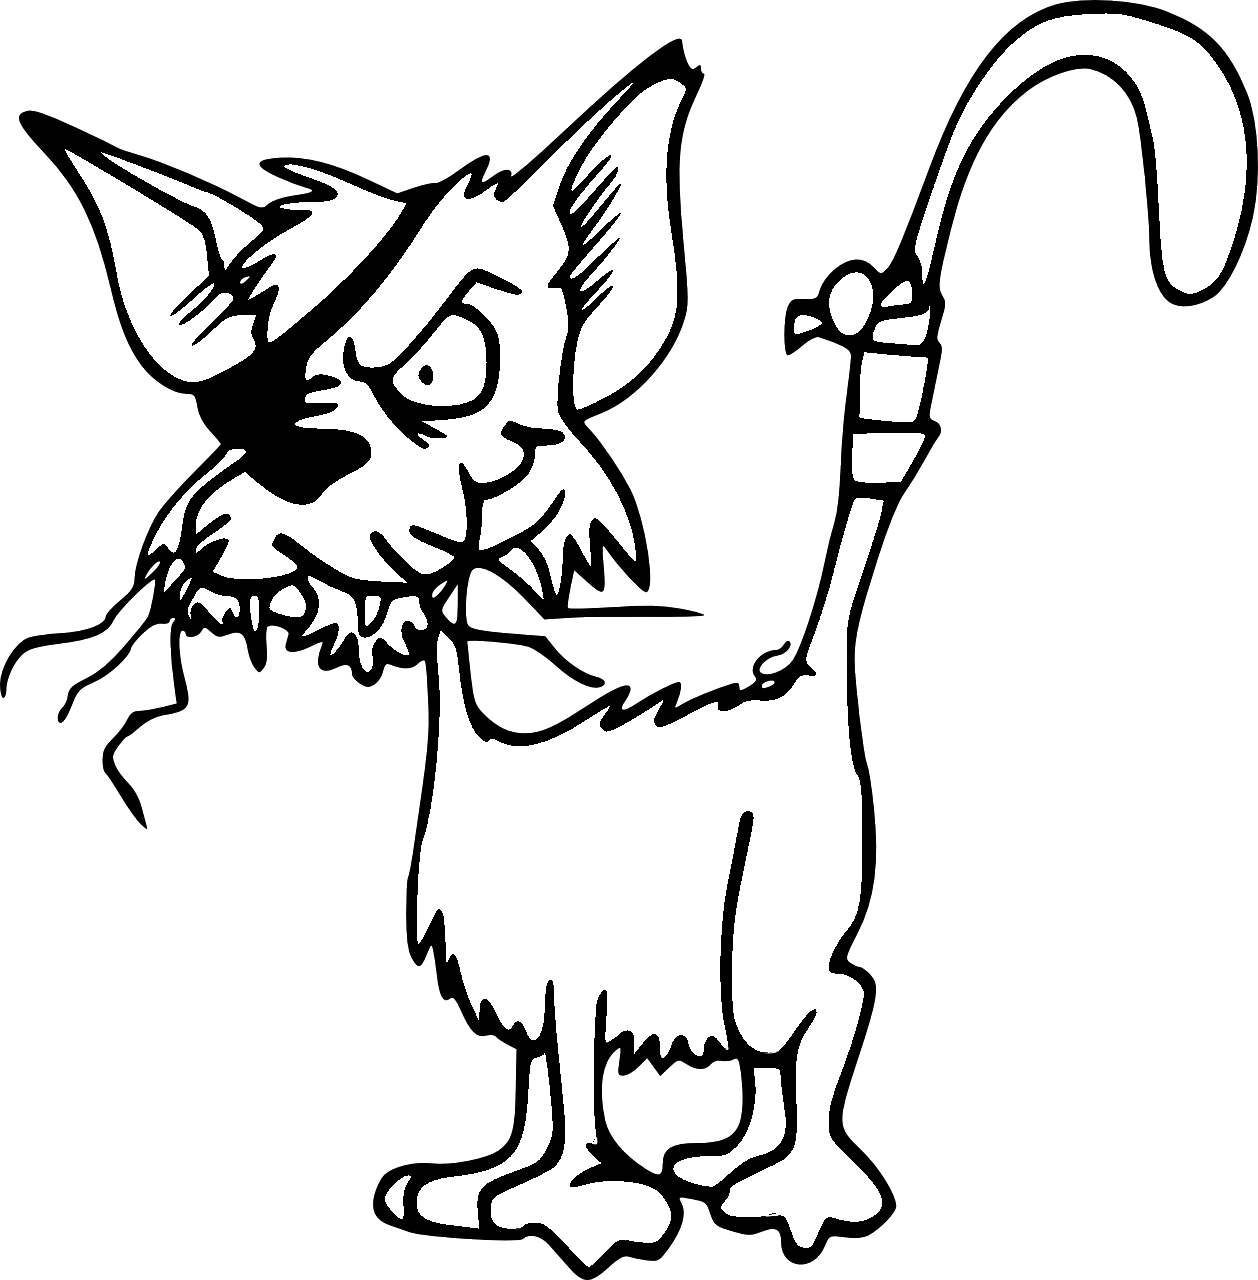 Pirate cat coloring page